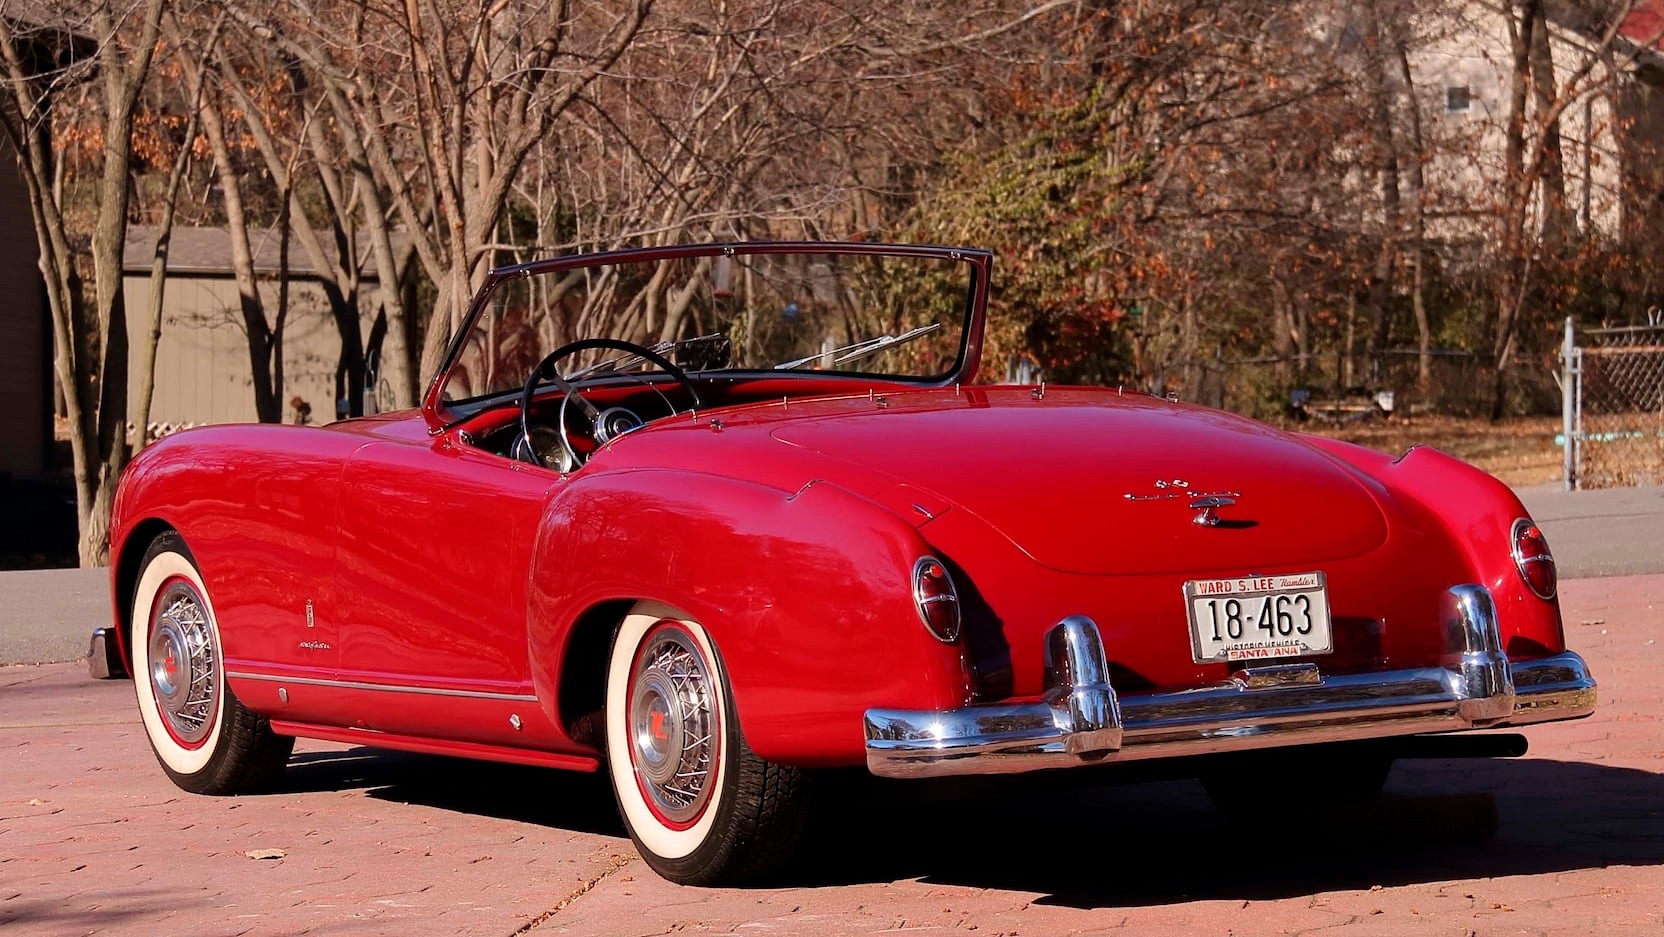 This Beautiful 1953 Nash-Healey Roadster Is Looking For A New Home |  Carscoops